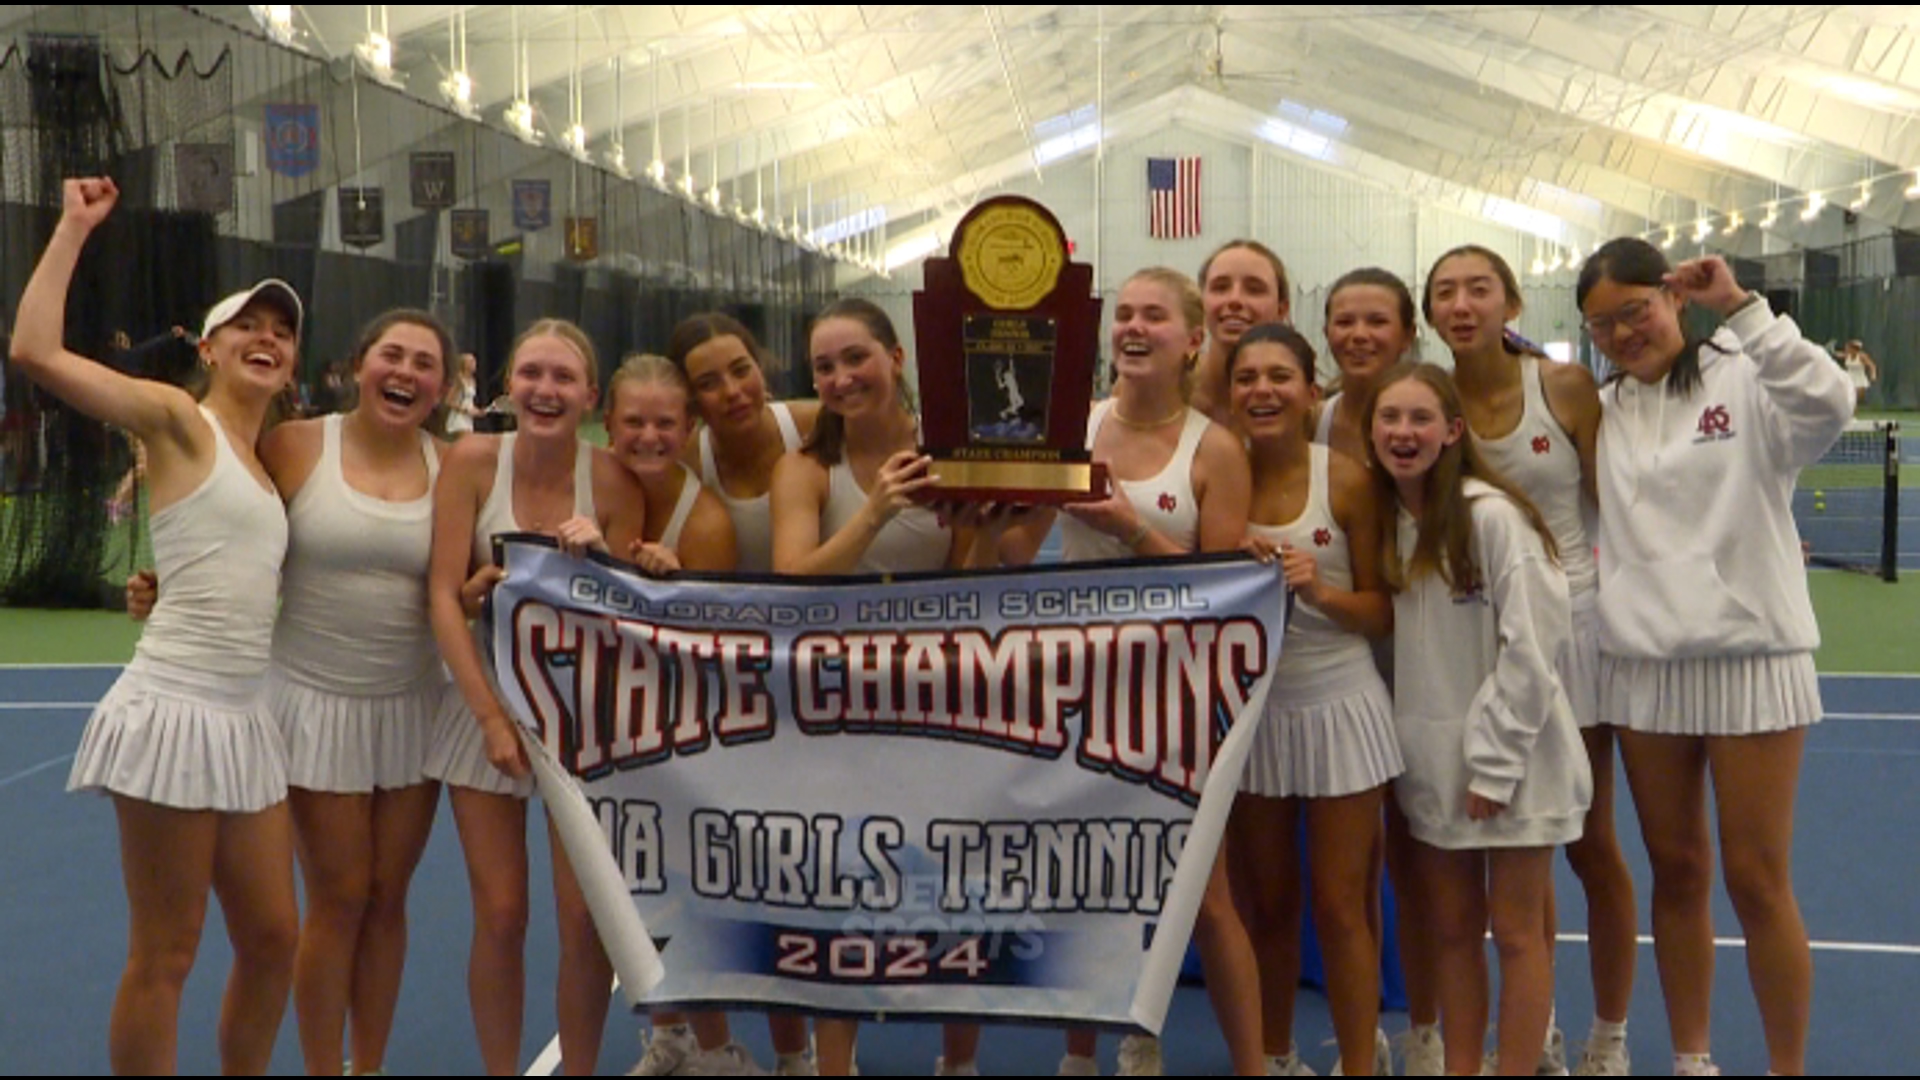 After a tough week of competition, the CHSAA girls' tennis champions have been crowned.